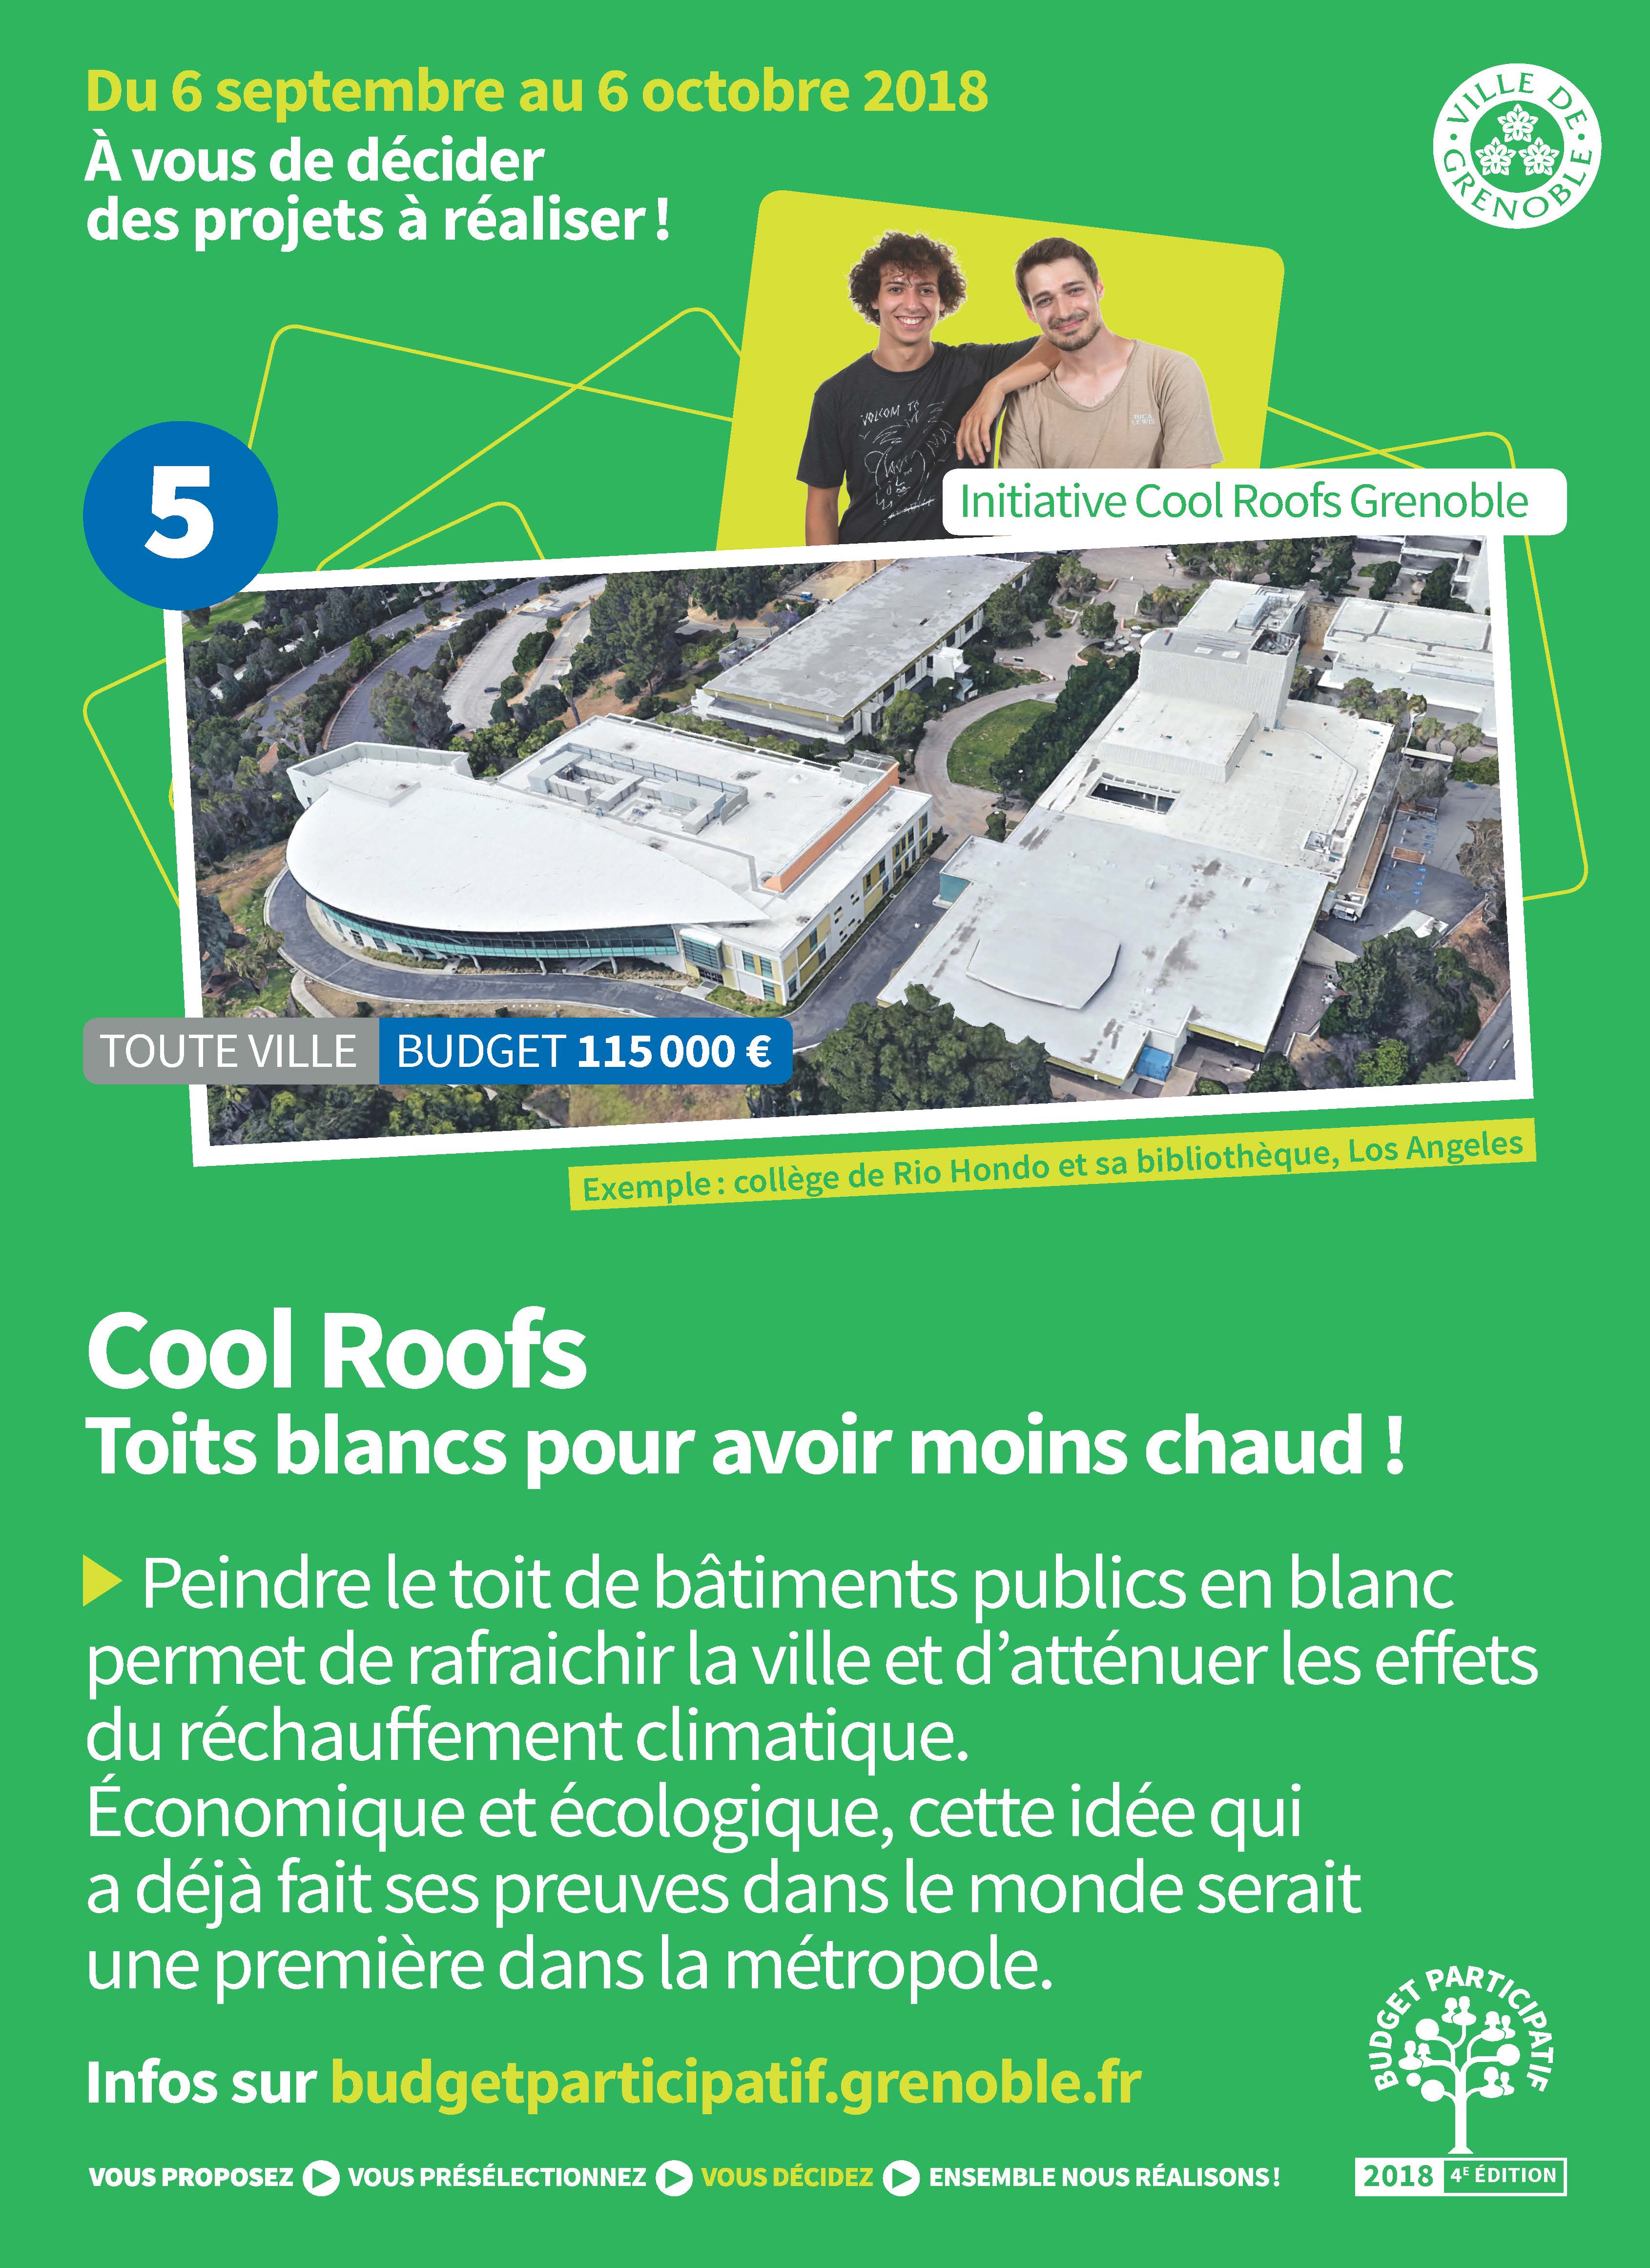 Projet Cool roofs